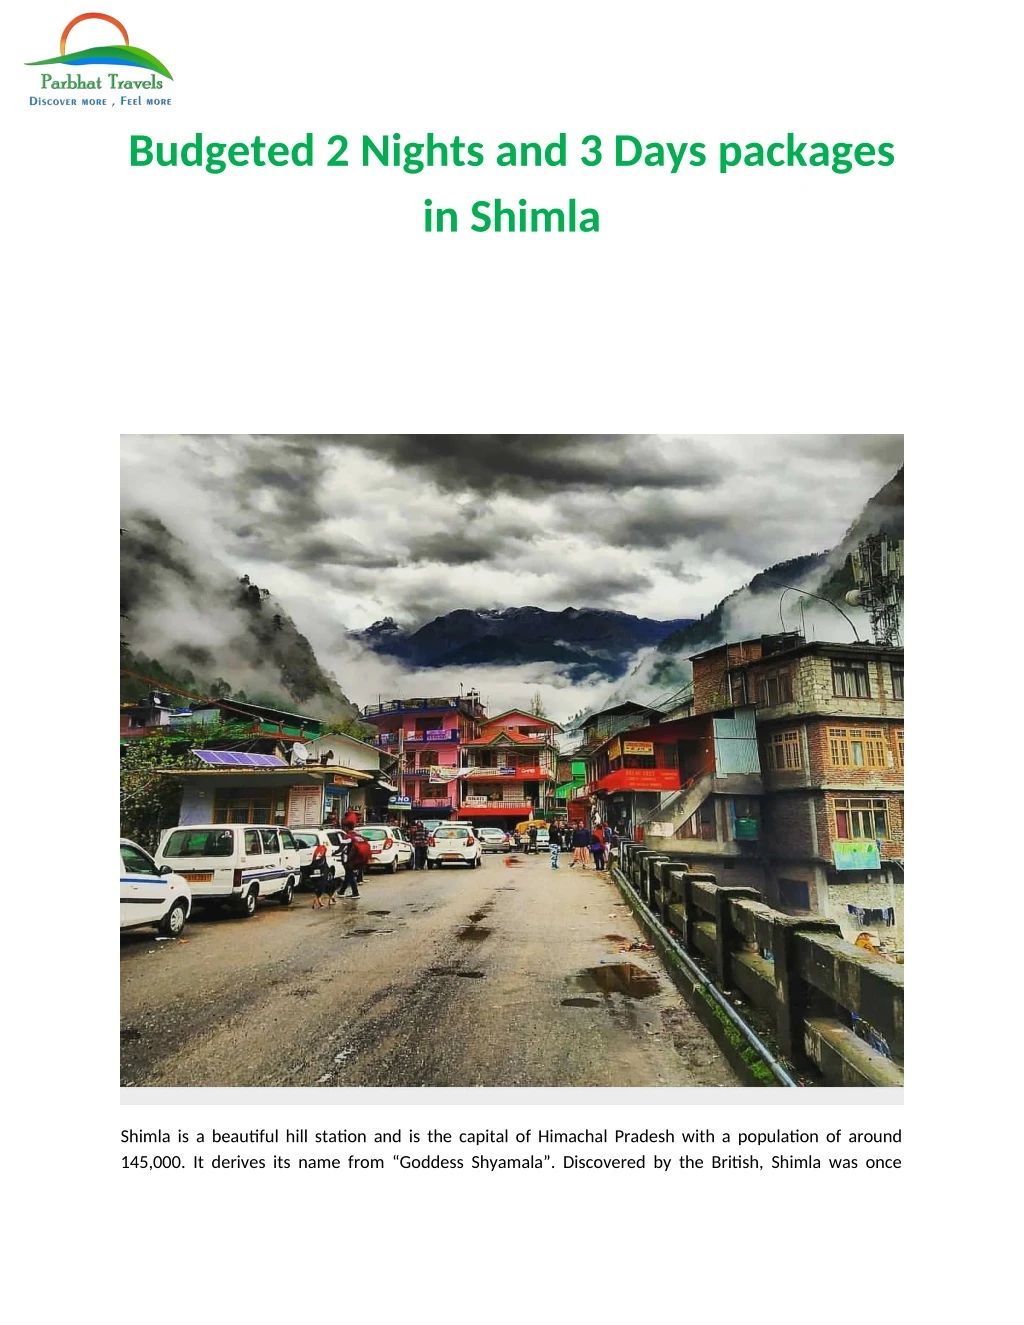 budgeted 2 nights and 3 days packages in shimla